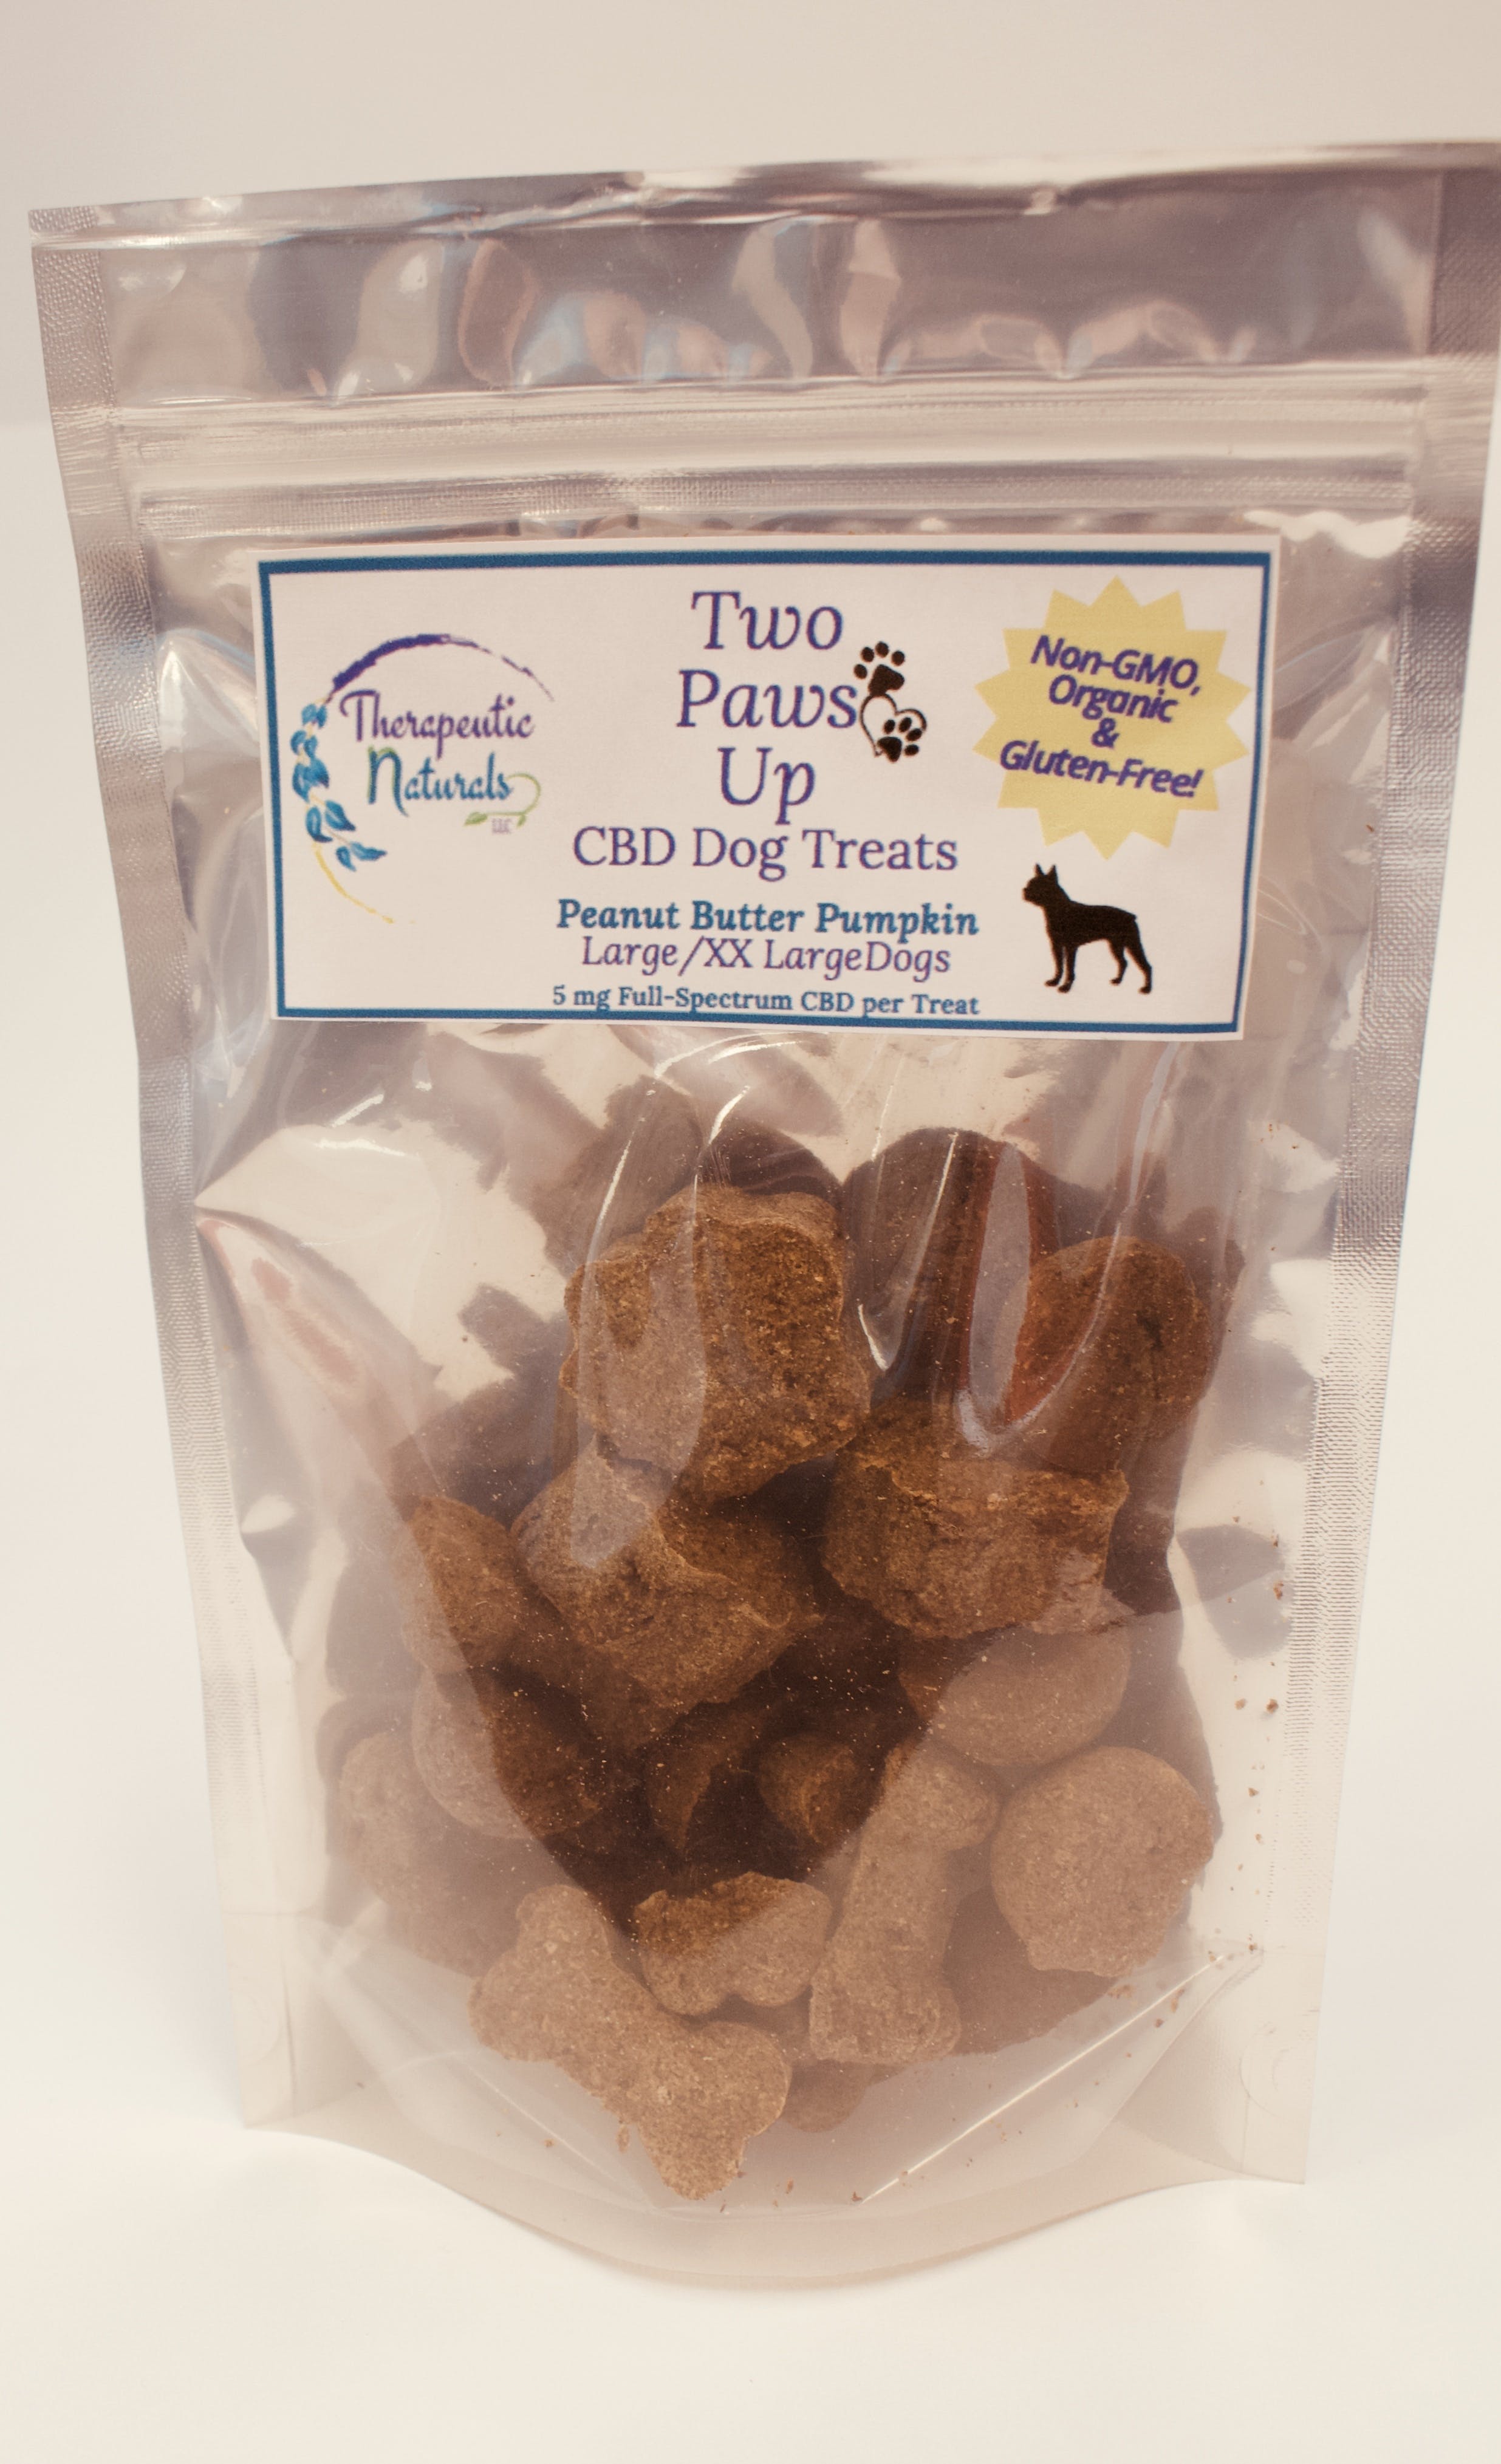 edible-two-paws-up-cbd-dog-treats-for-small-and-large-dogs